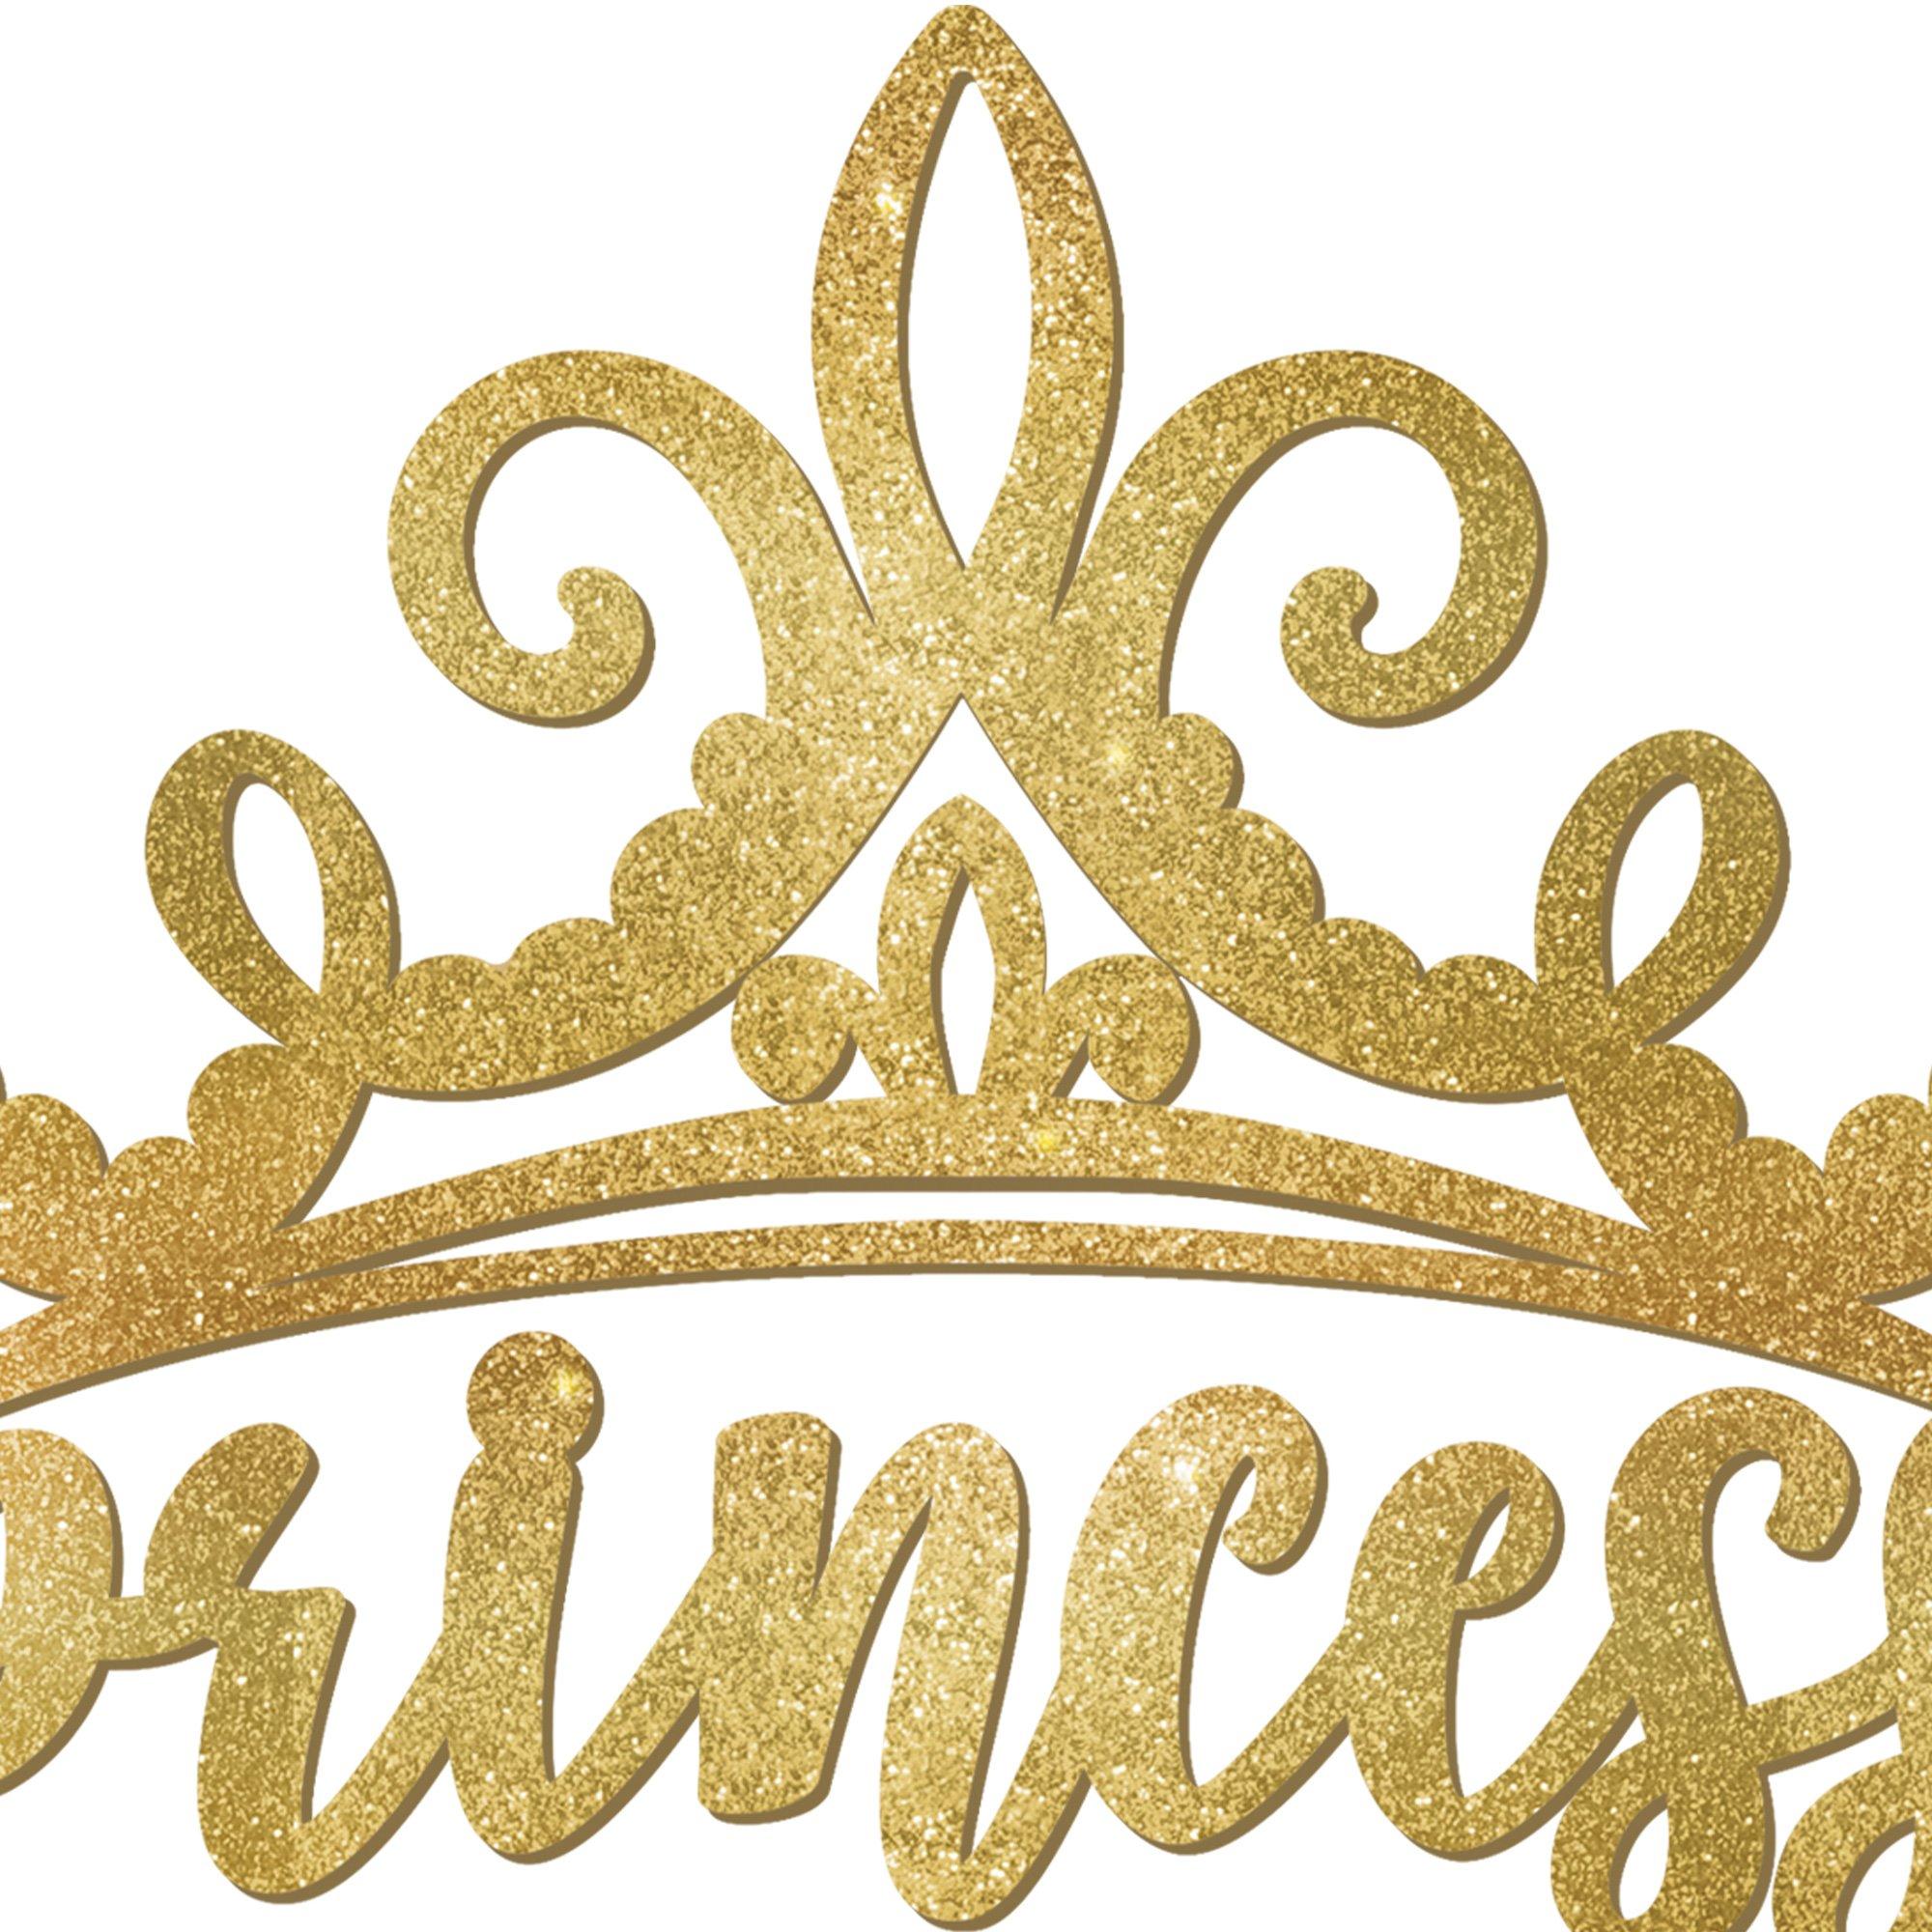 Glitter Disney Once Upon a Time Princess Cake Topper 6in x 5in ...